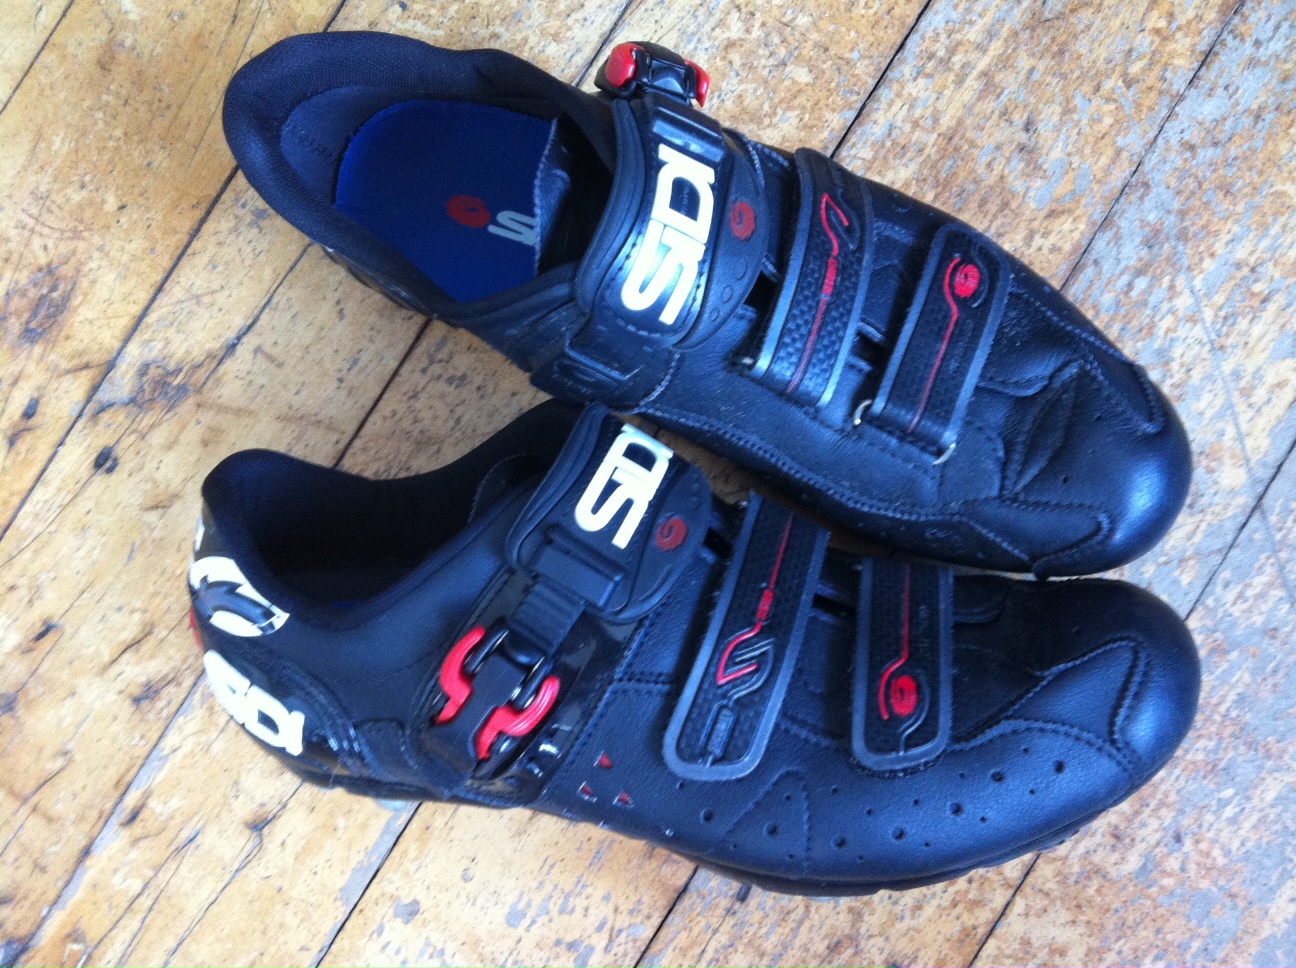 bike clipless shoes